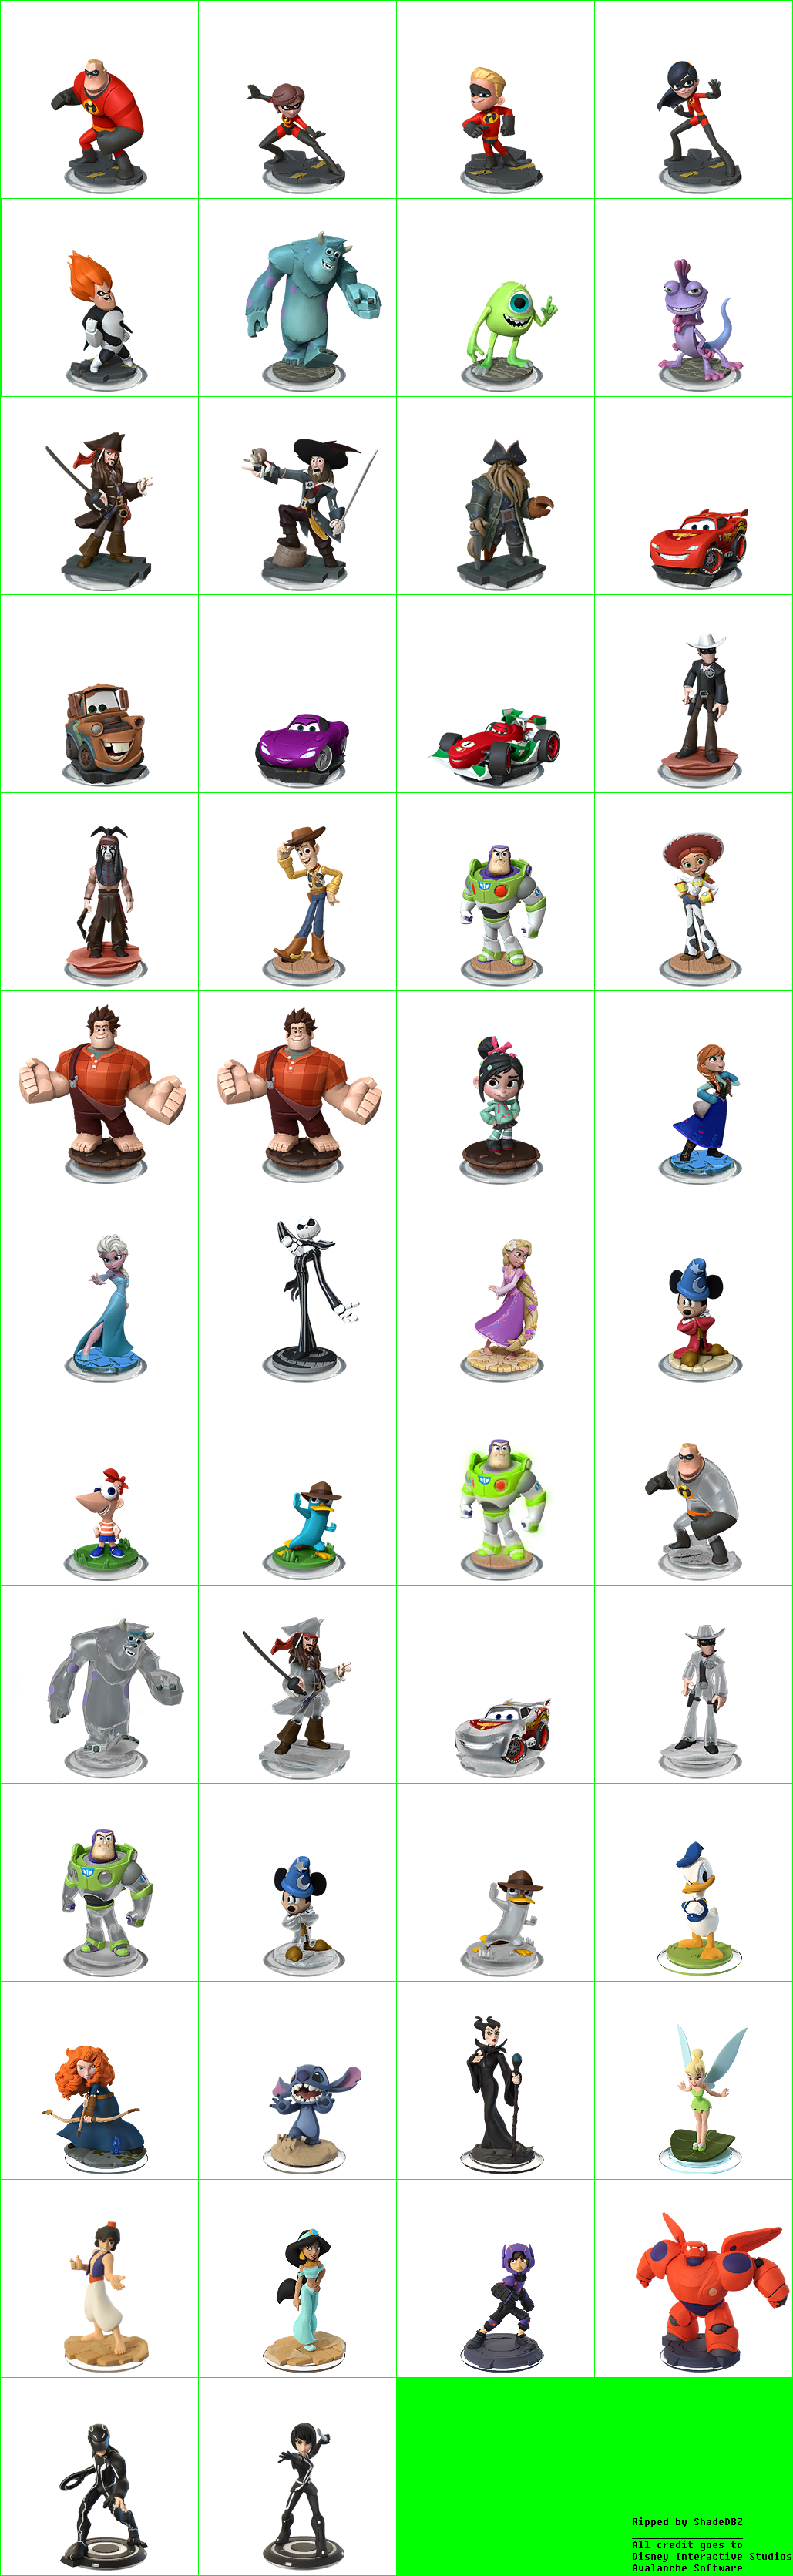 Disney Character Previews (Small)